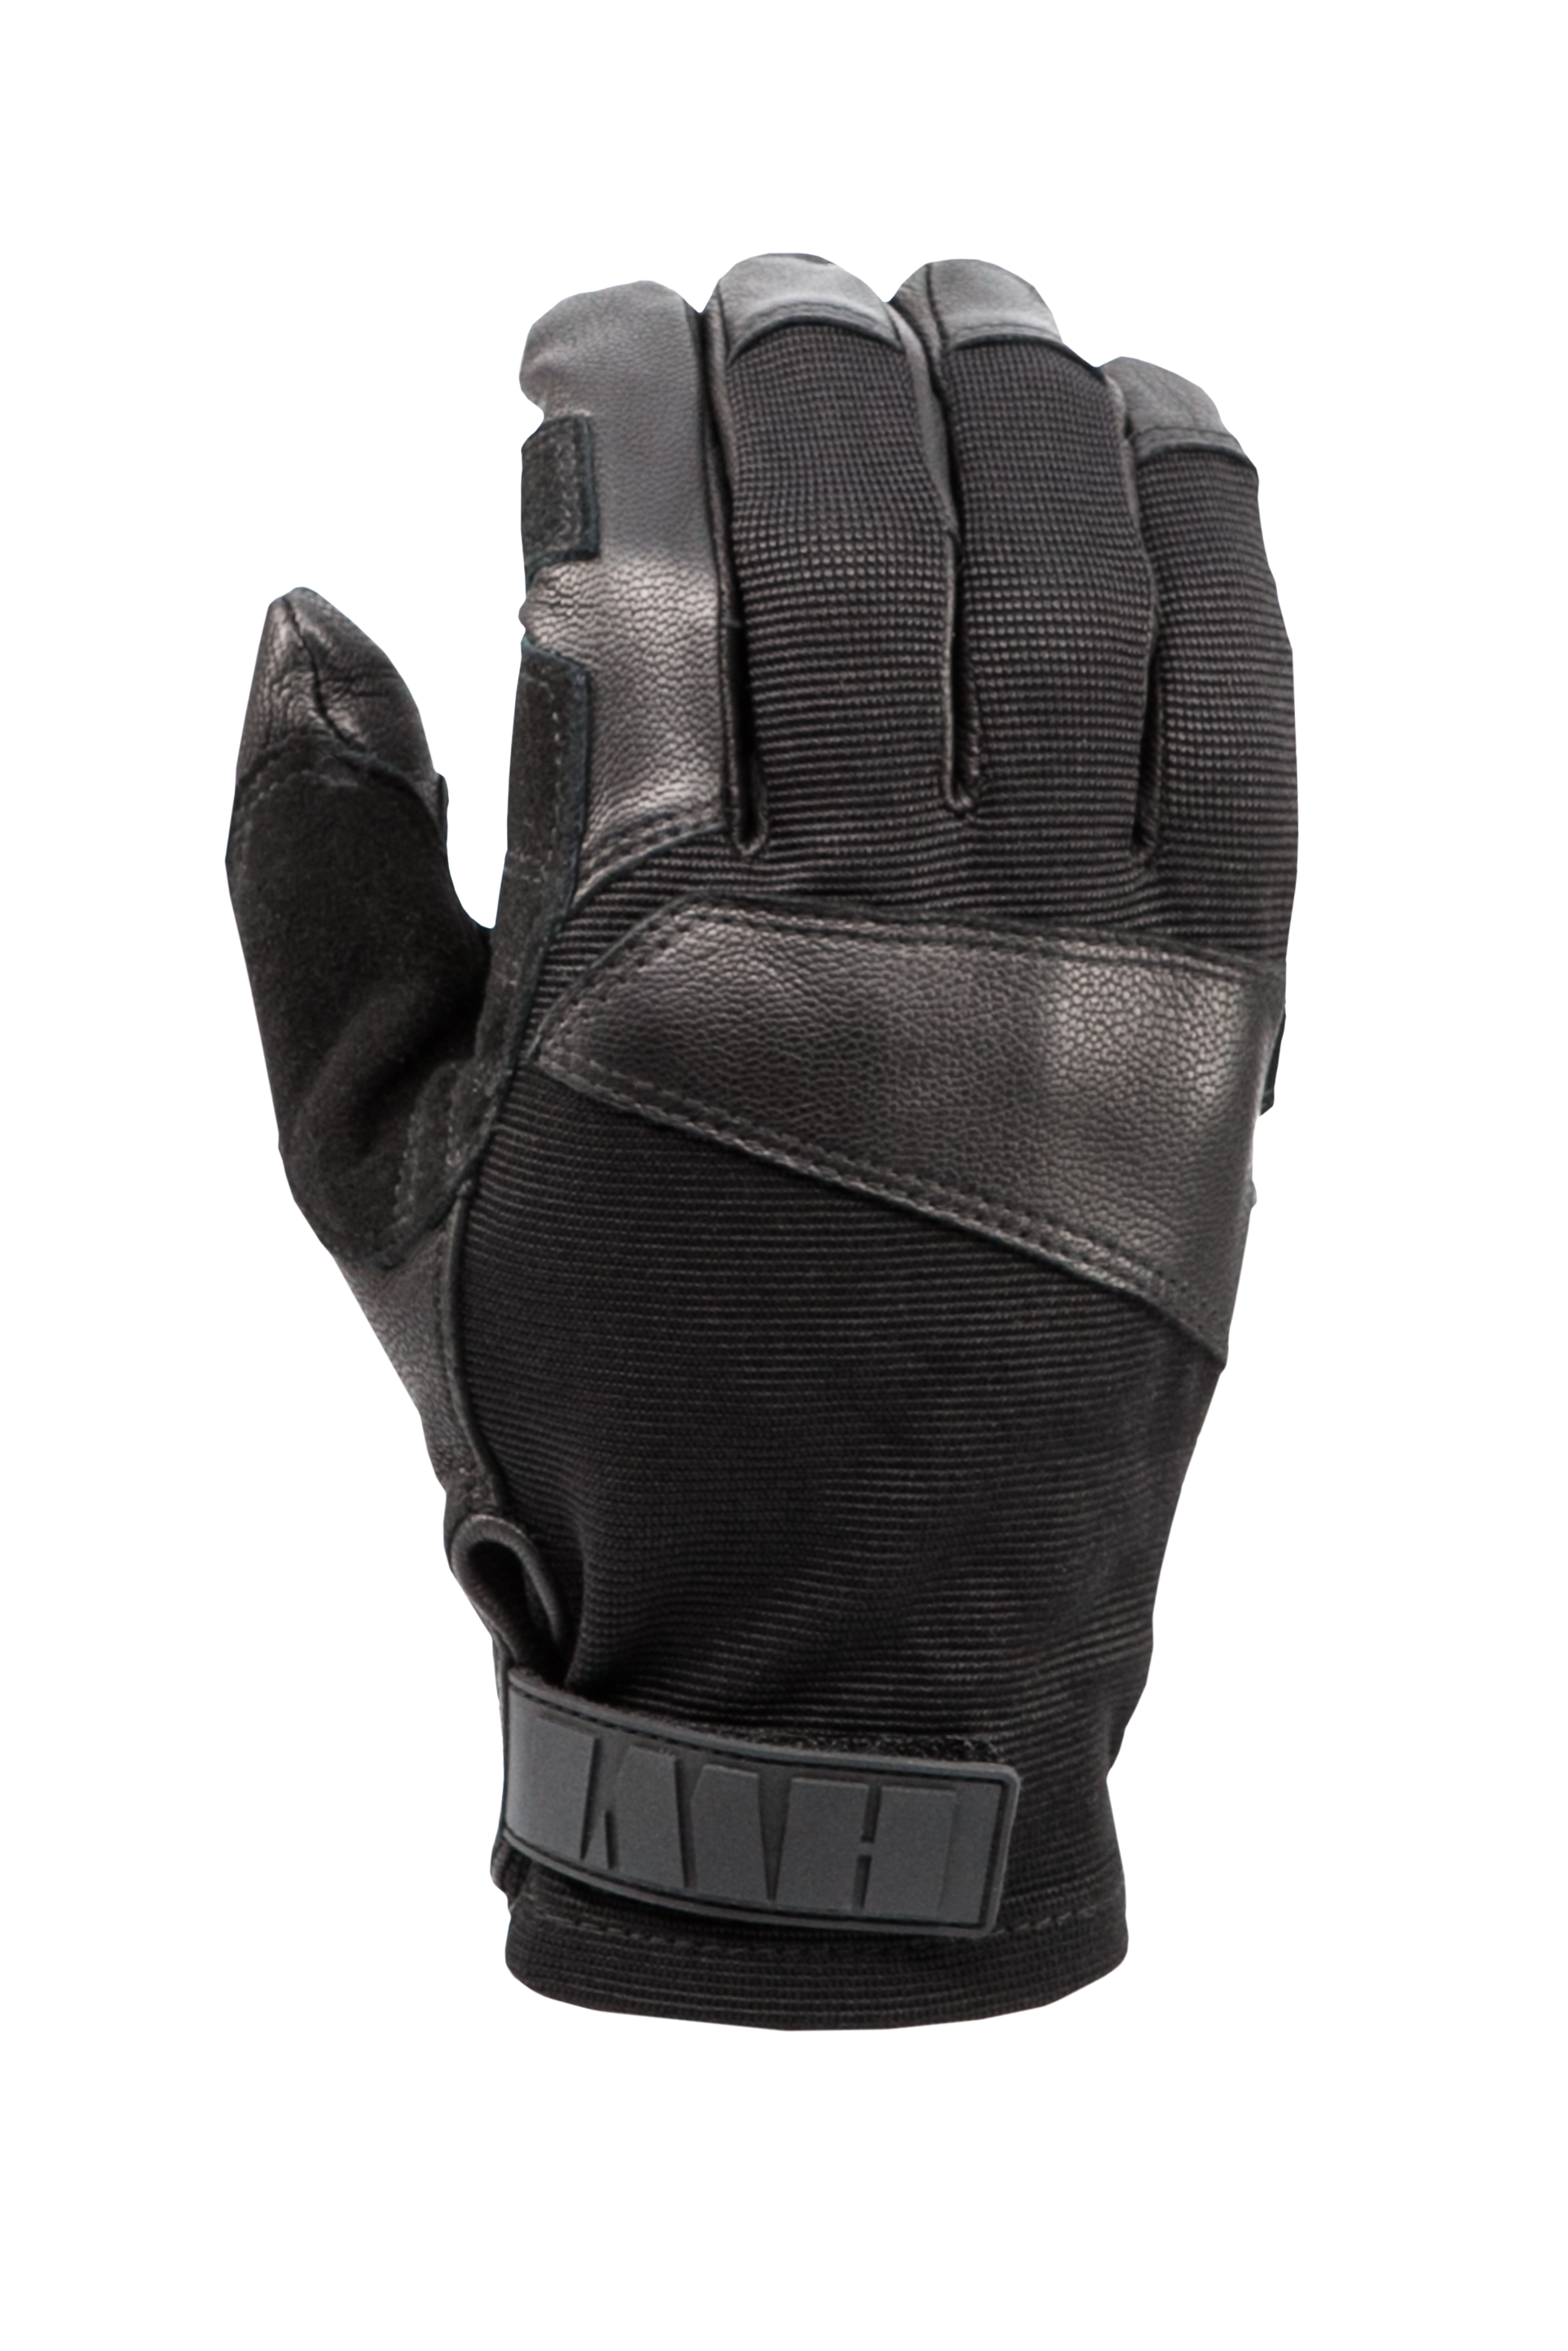 HWI Gear Tactical Fast Rope Gloves , Up to 17% Off with Free S&H